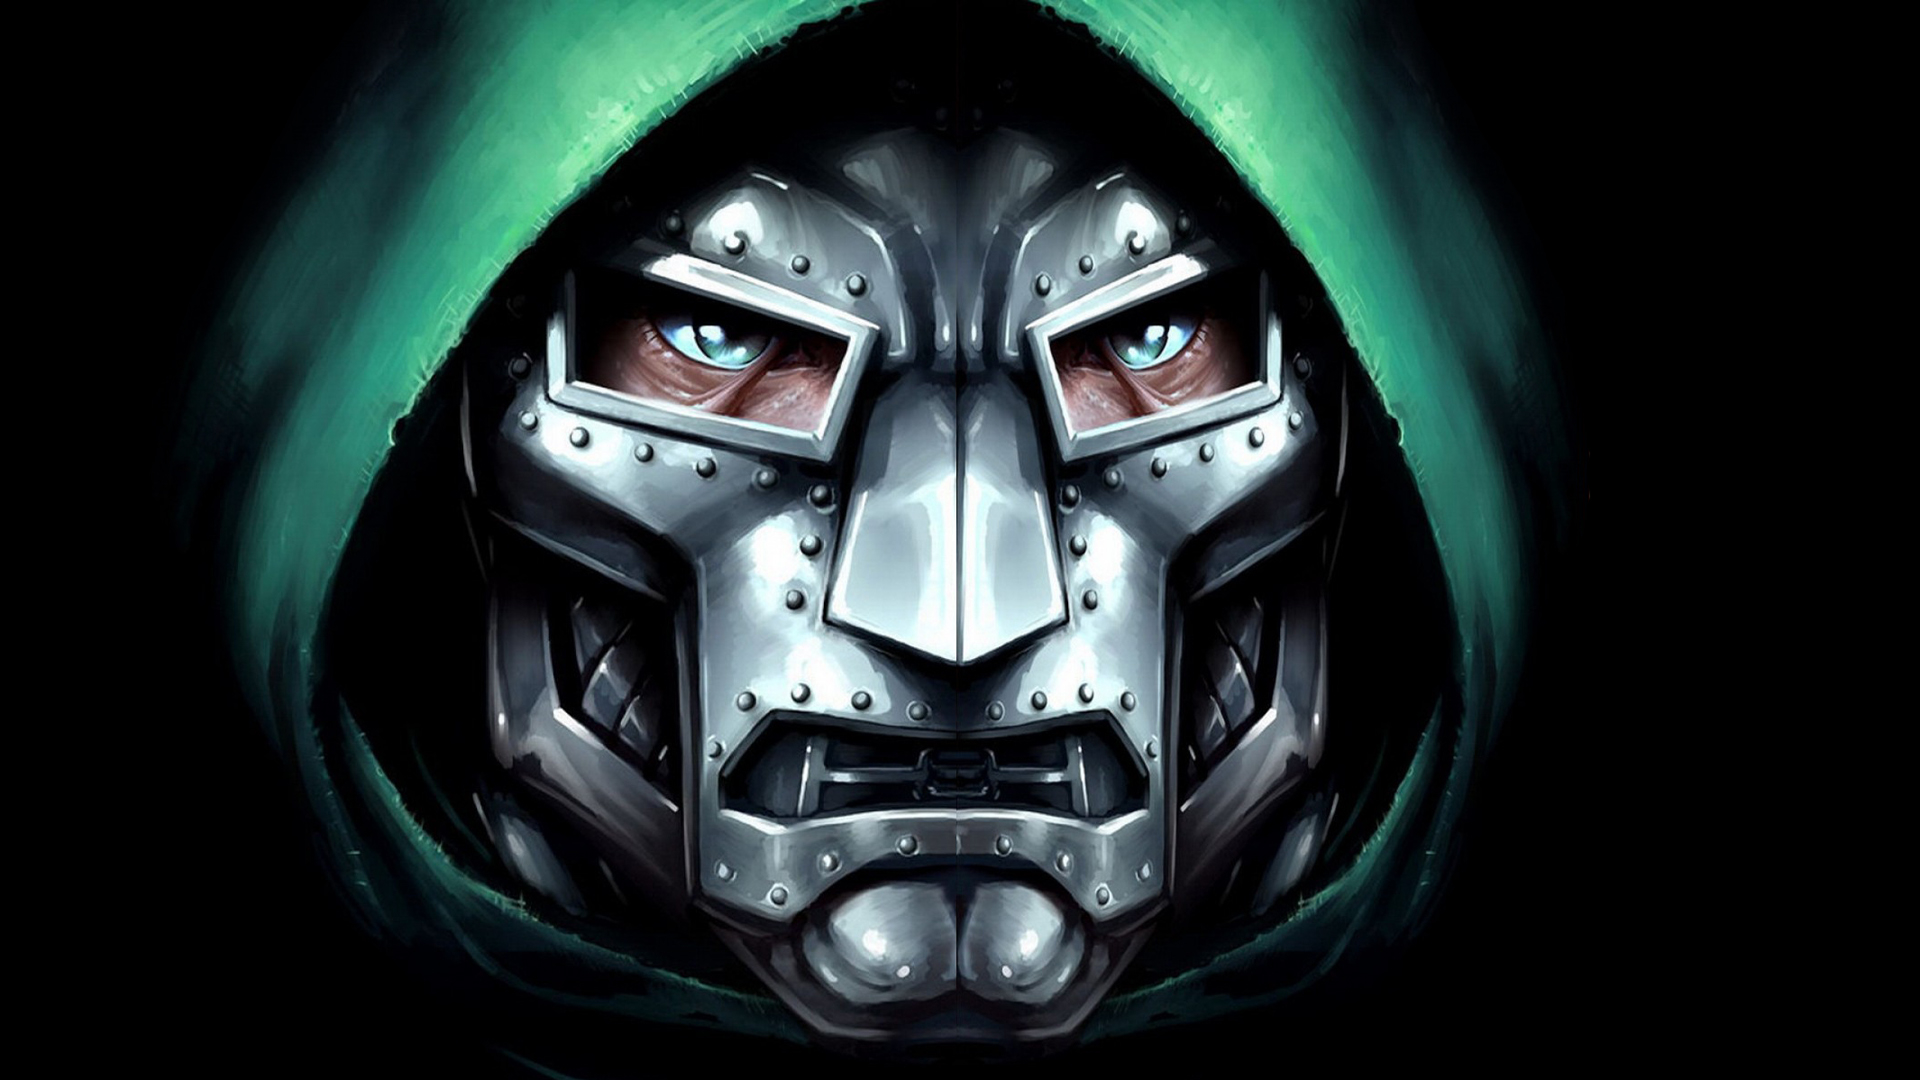 3840x21602021 Marvel Doctor Doom 3840x21602021 Resolution Wallpaper, HD  Superheroes 4K Wallpapers, Images, Photos and Background - Wallpapers Den